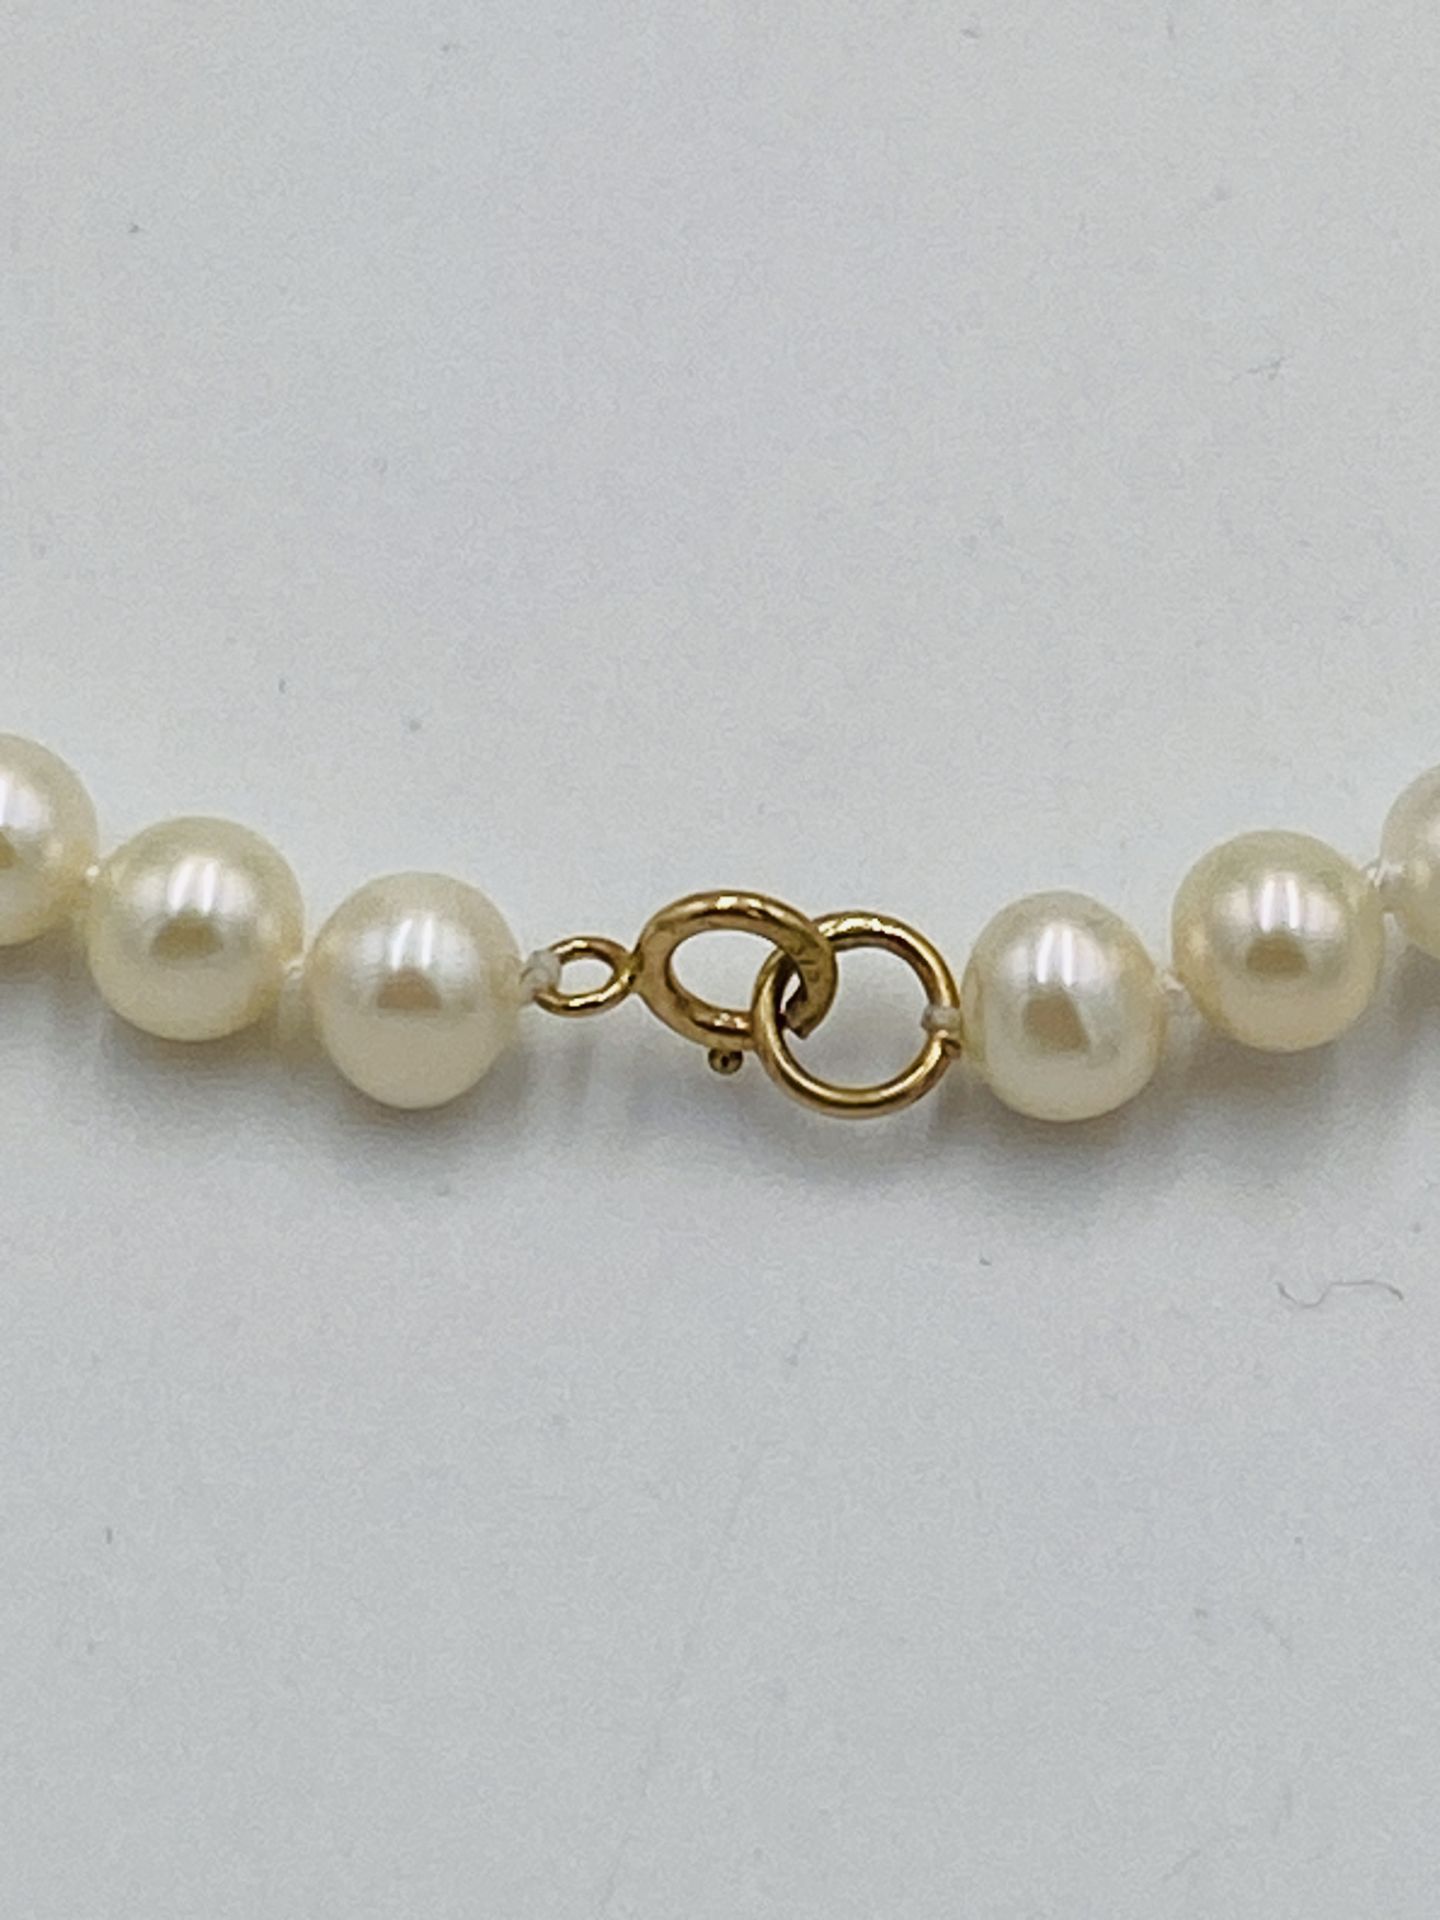 Pearl necklace with 9ct gold clasp - Image 4 of 4